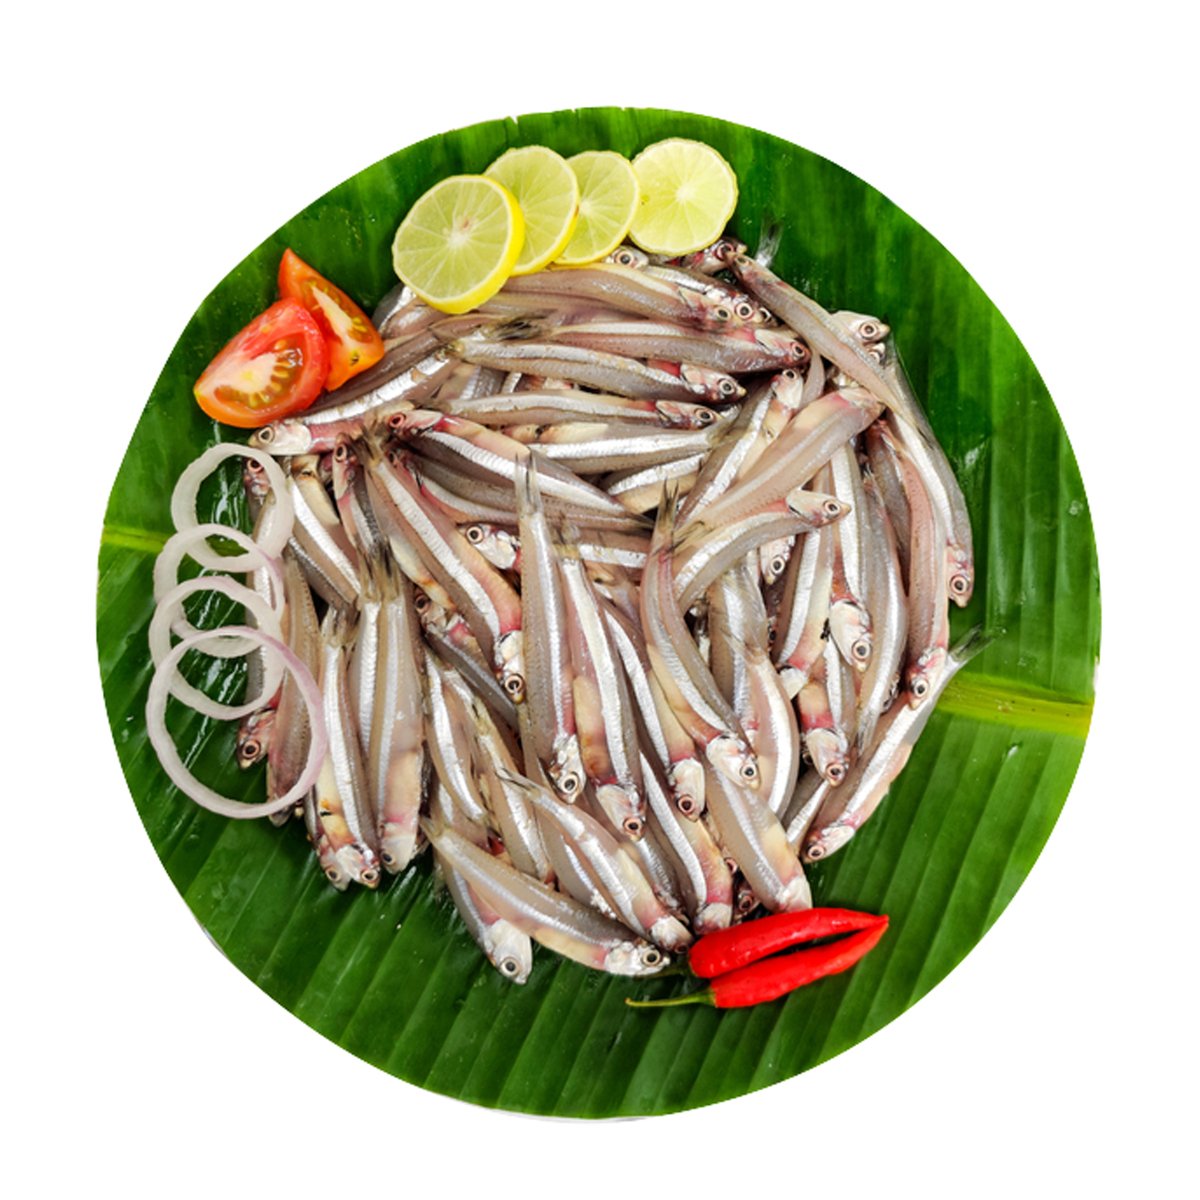 Anchovies Fish Small 200g Approx Weight